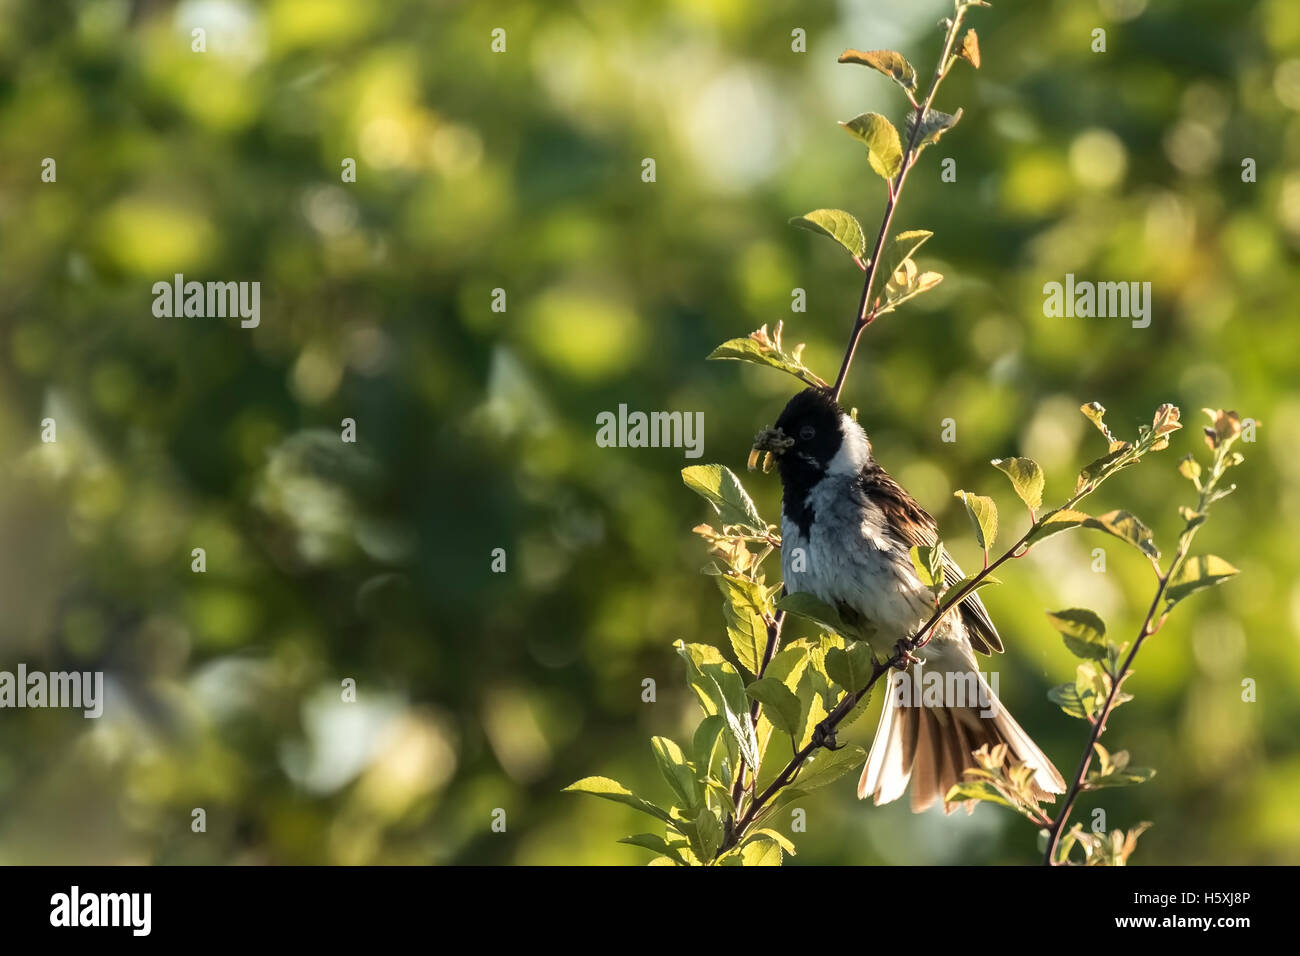 A common reed bunting Emberiza schoeniclus sings a song in a tree on a sunny evening during Spring season Stock Photo